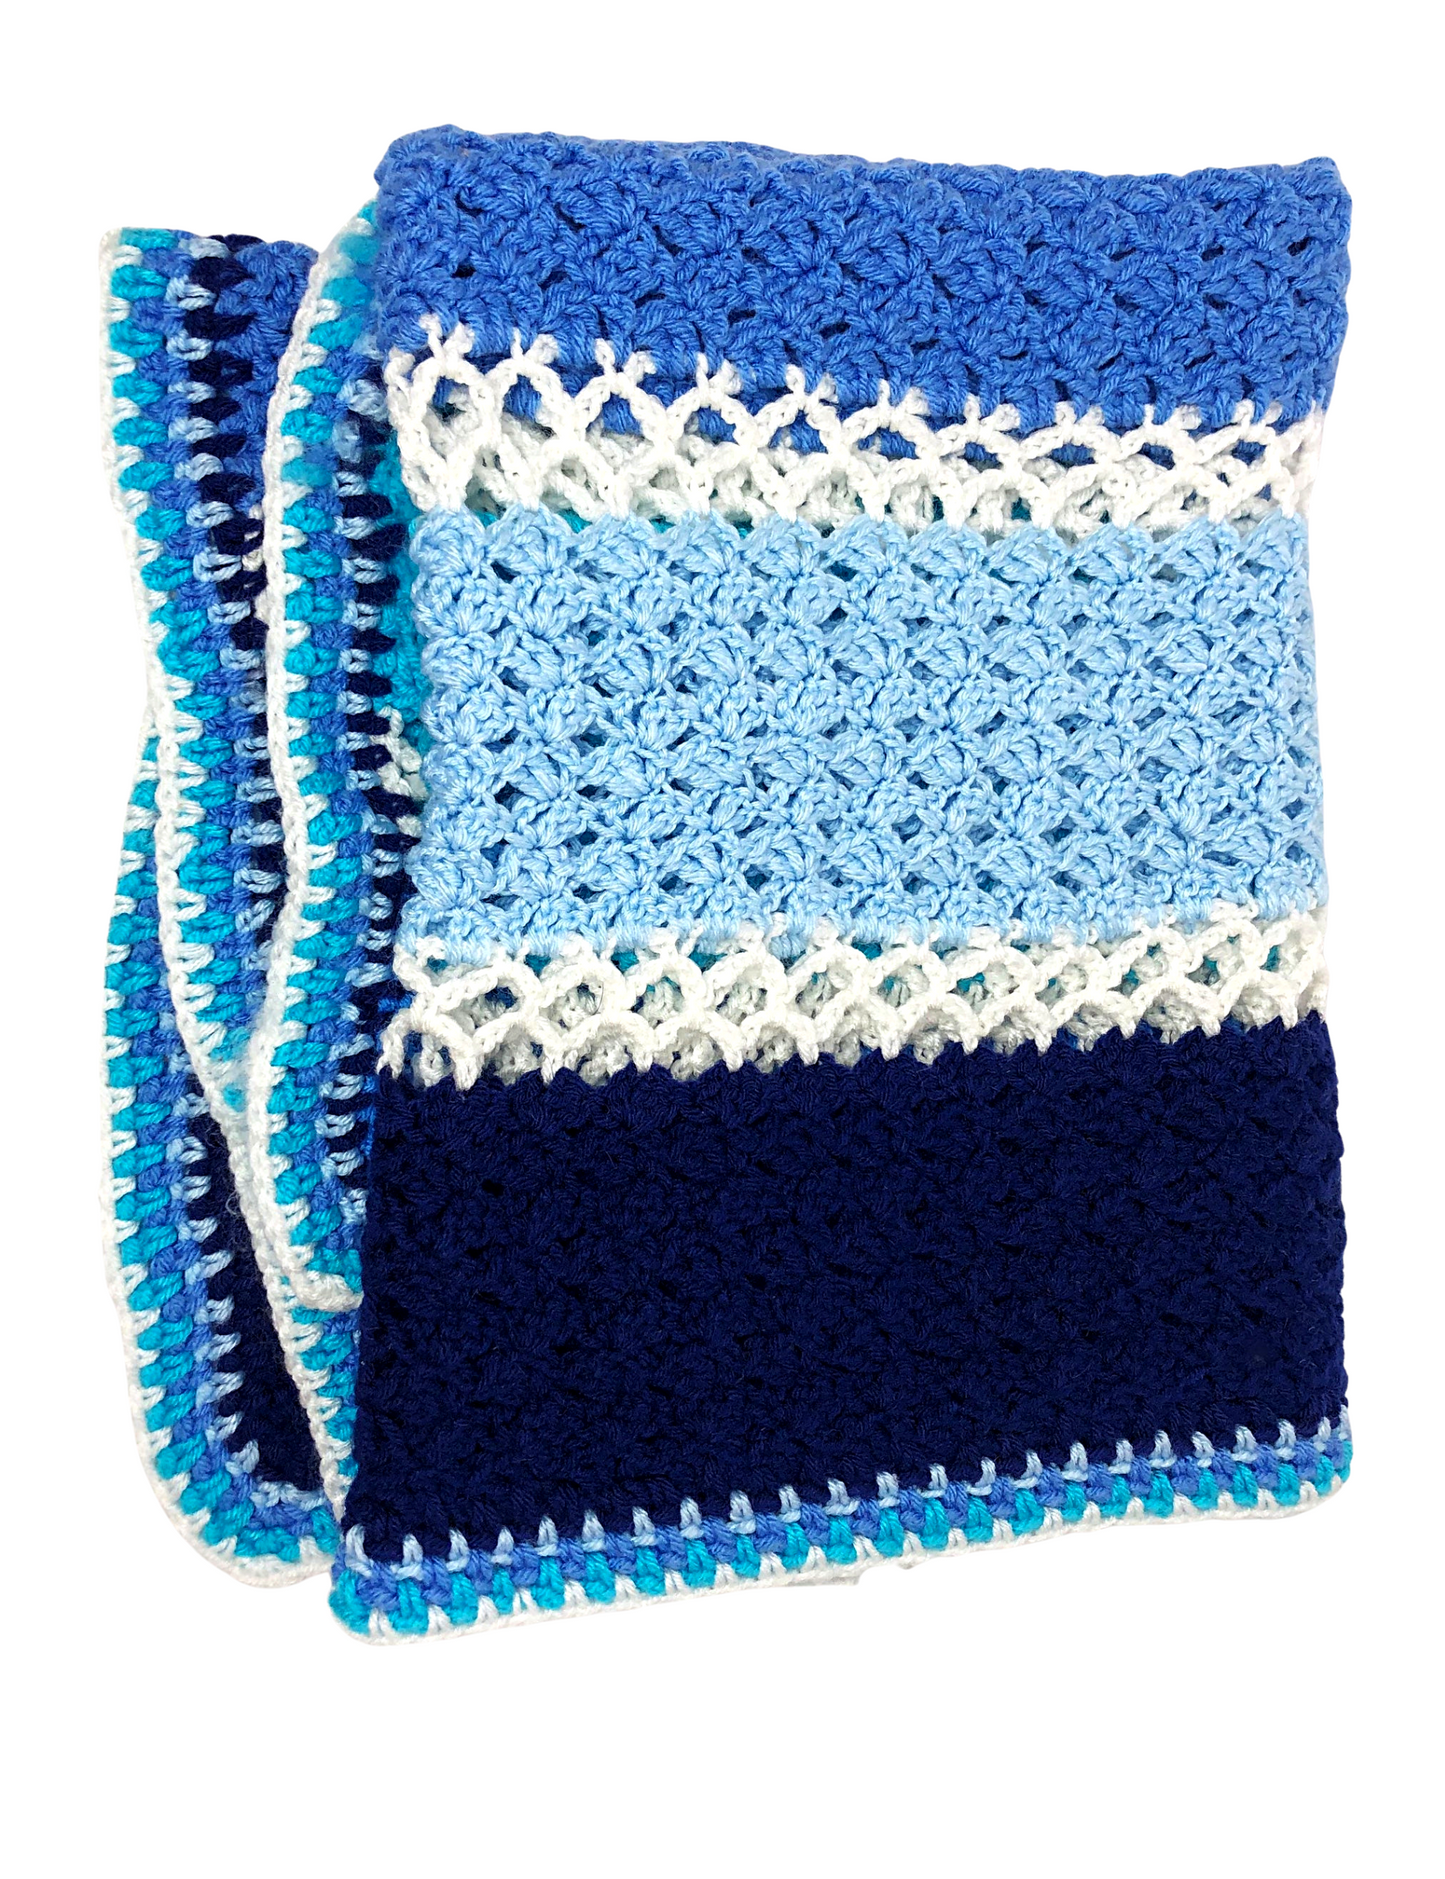 80’s Chunky Blue Ombré Stripe Thick Crocheted Granny Blanket Throw 57x37